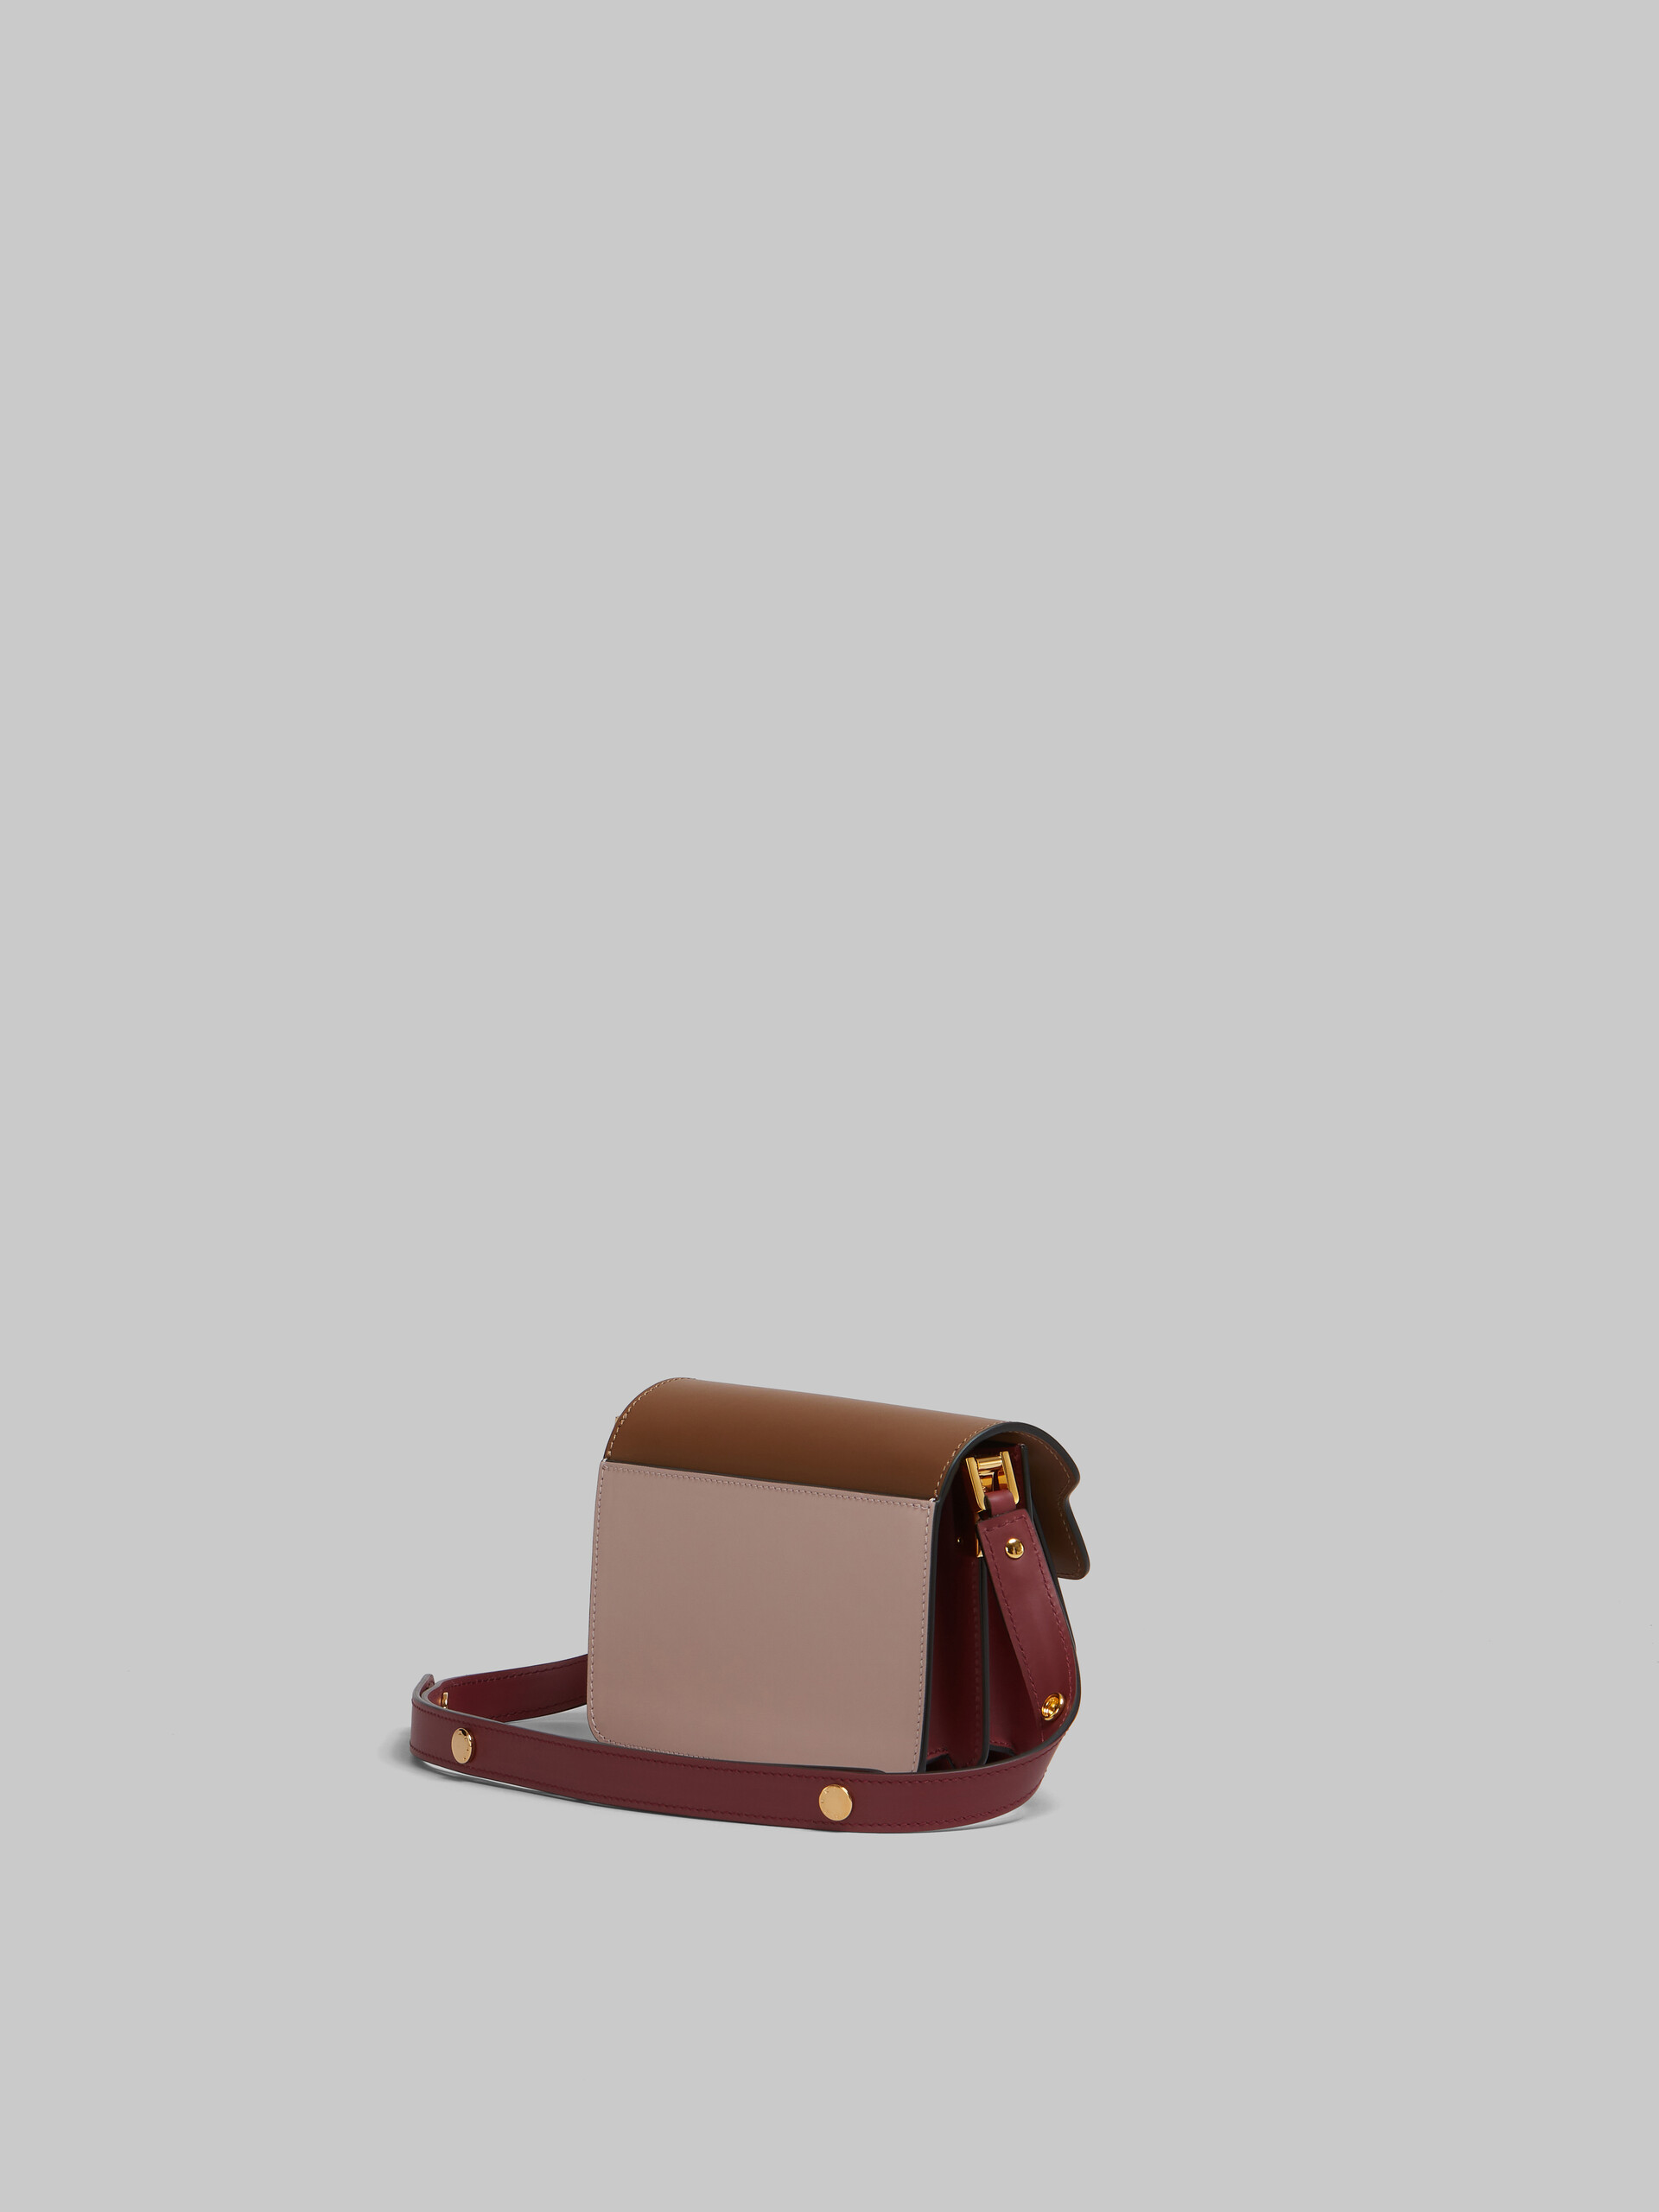 TRUNK Bag In Single Color Calfskin ‎ from the Marni ‎Fall Winter